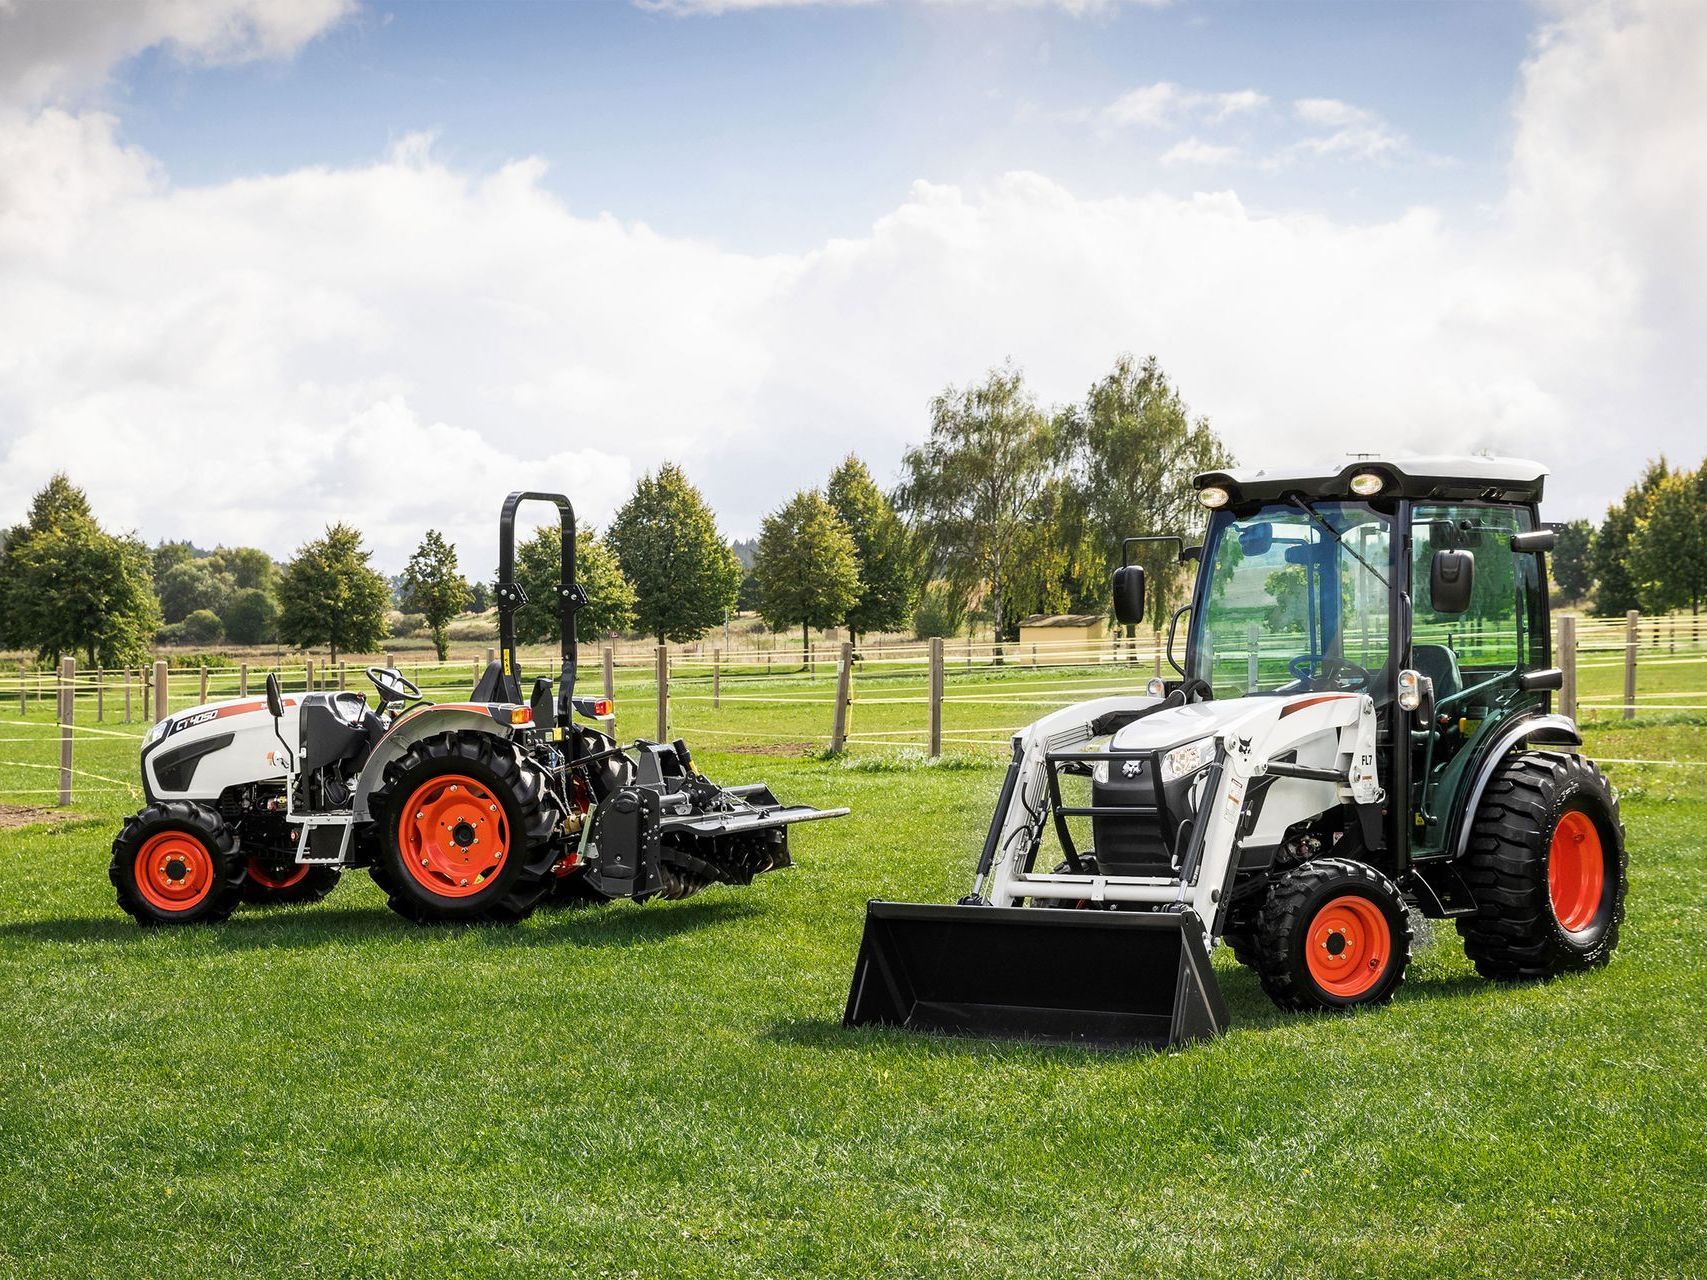 two bobcat tractors are parked in a grassy field